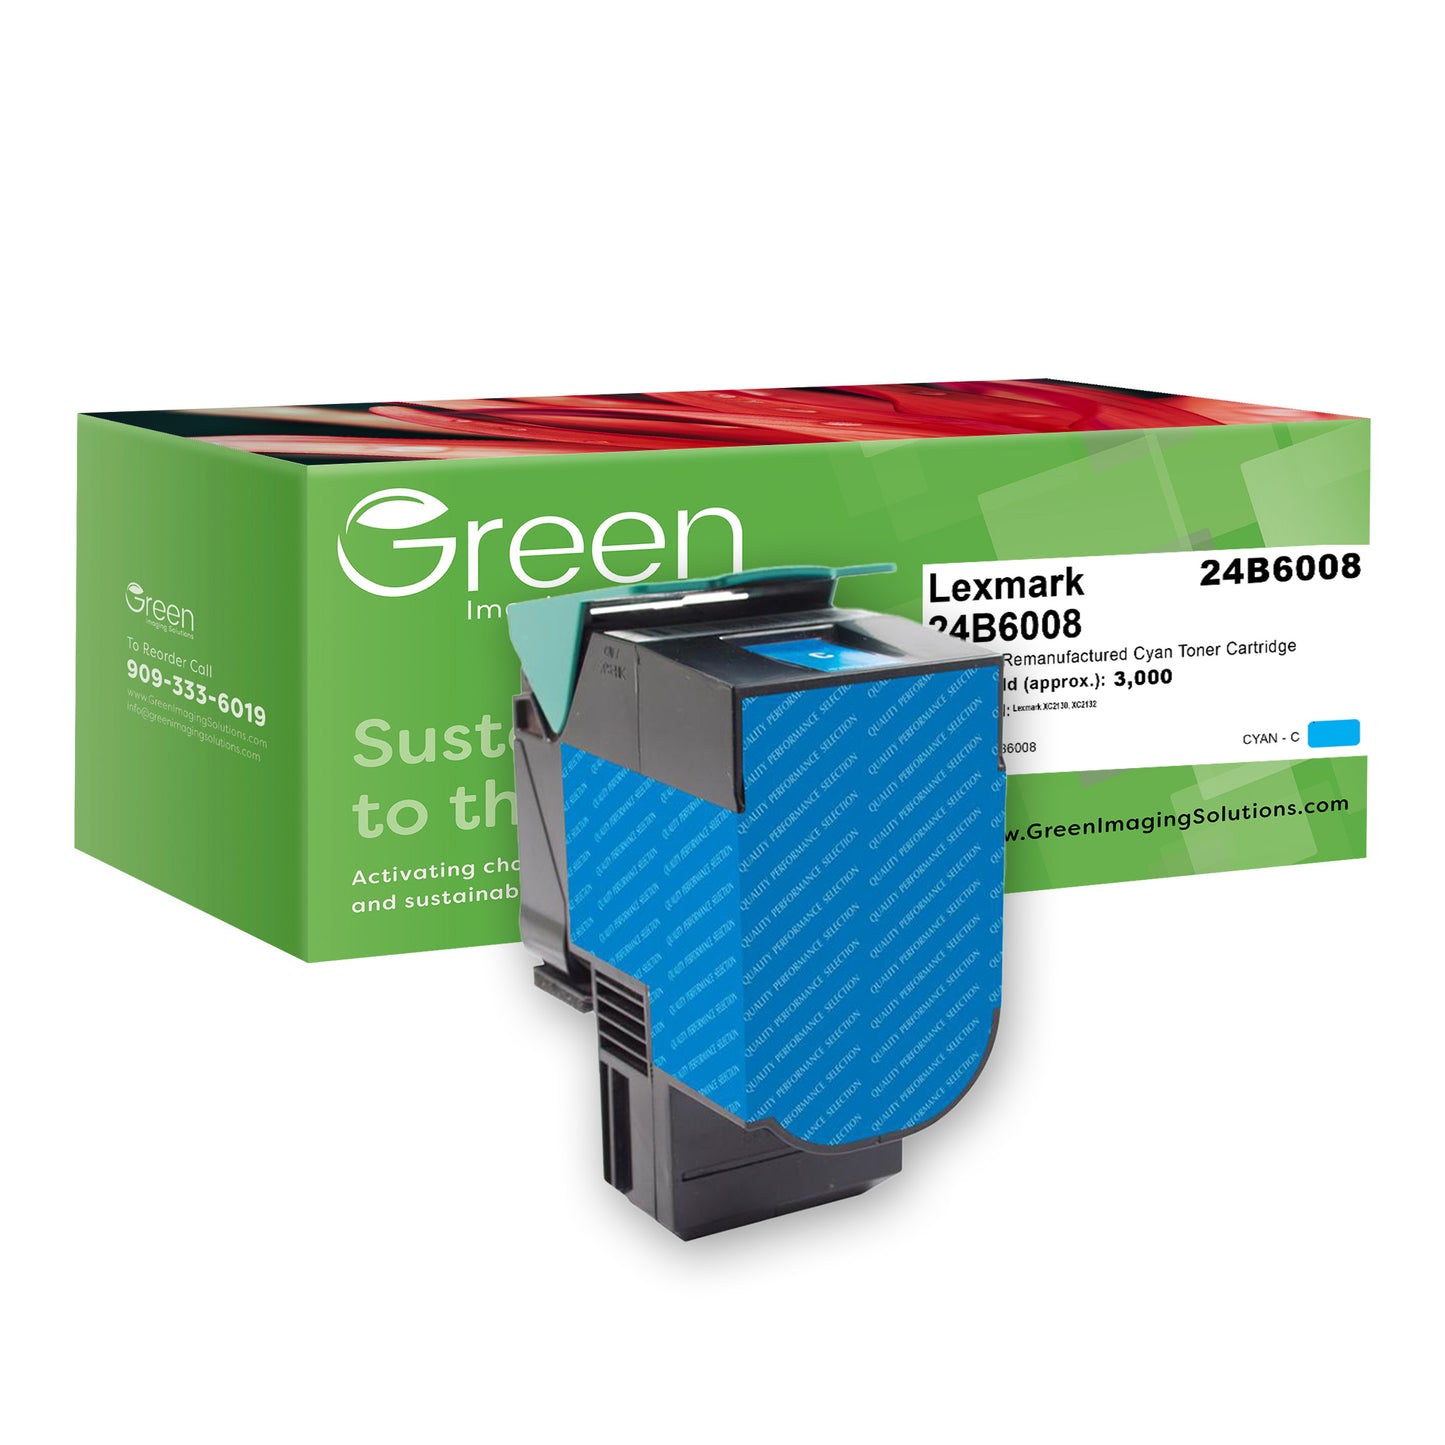 Green Imaging Solutions USA Remanufactured Cyan Toner Cartridge for Lexmark XC2130